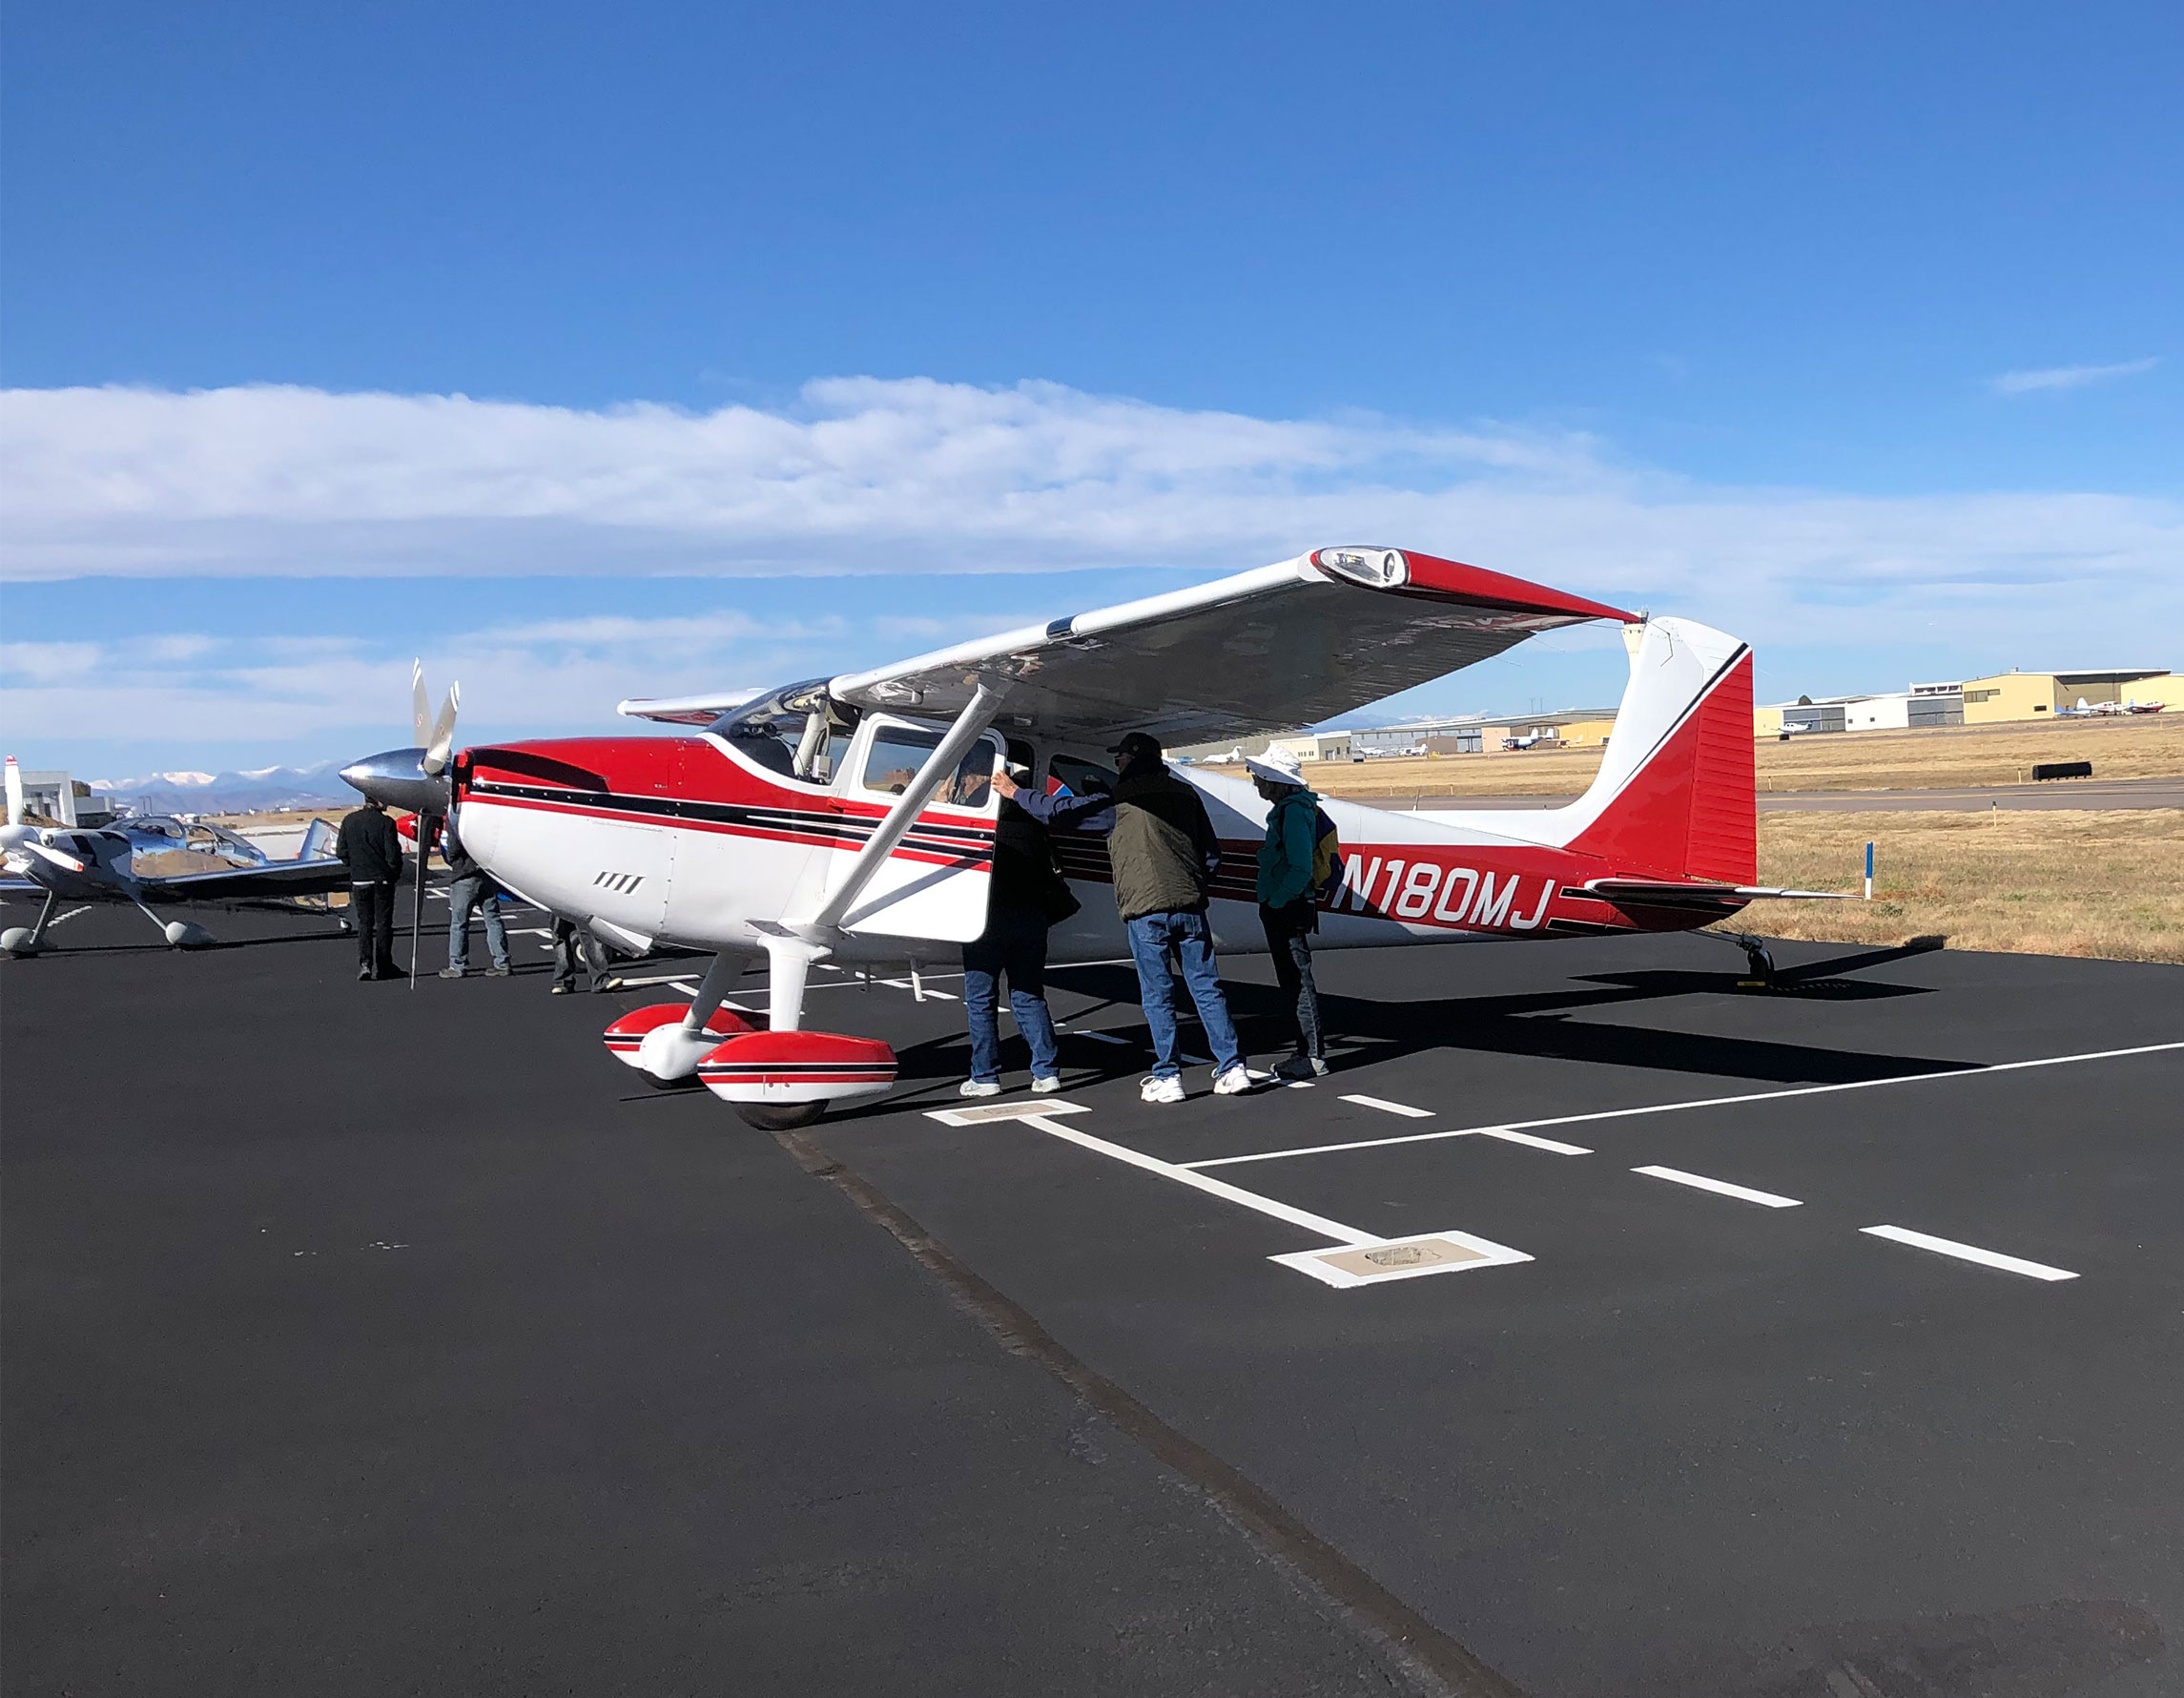 Guests view aircraf on the ramp at Exploration of Flight